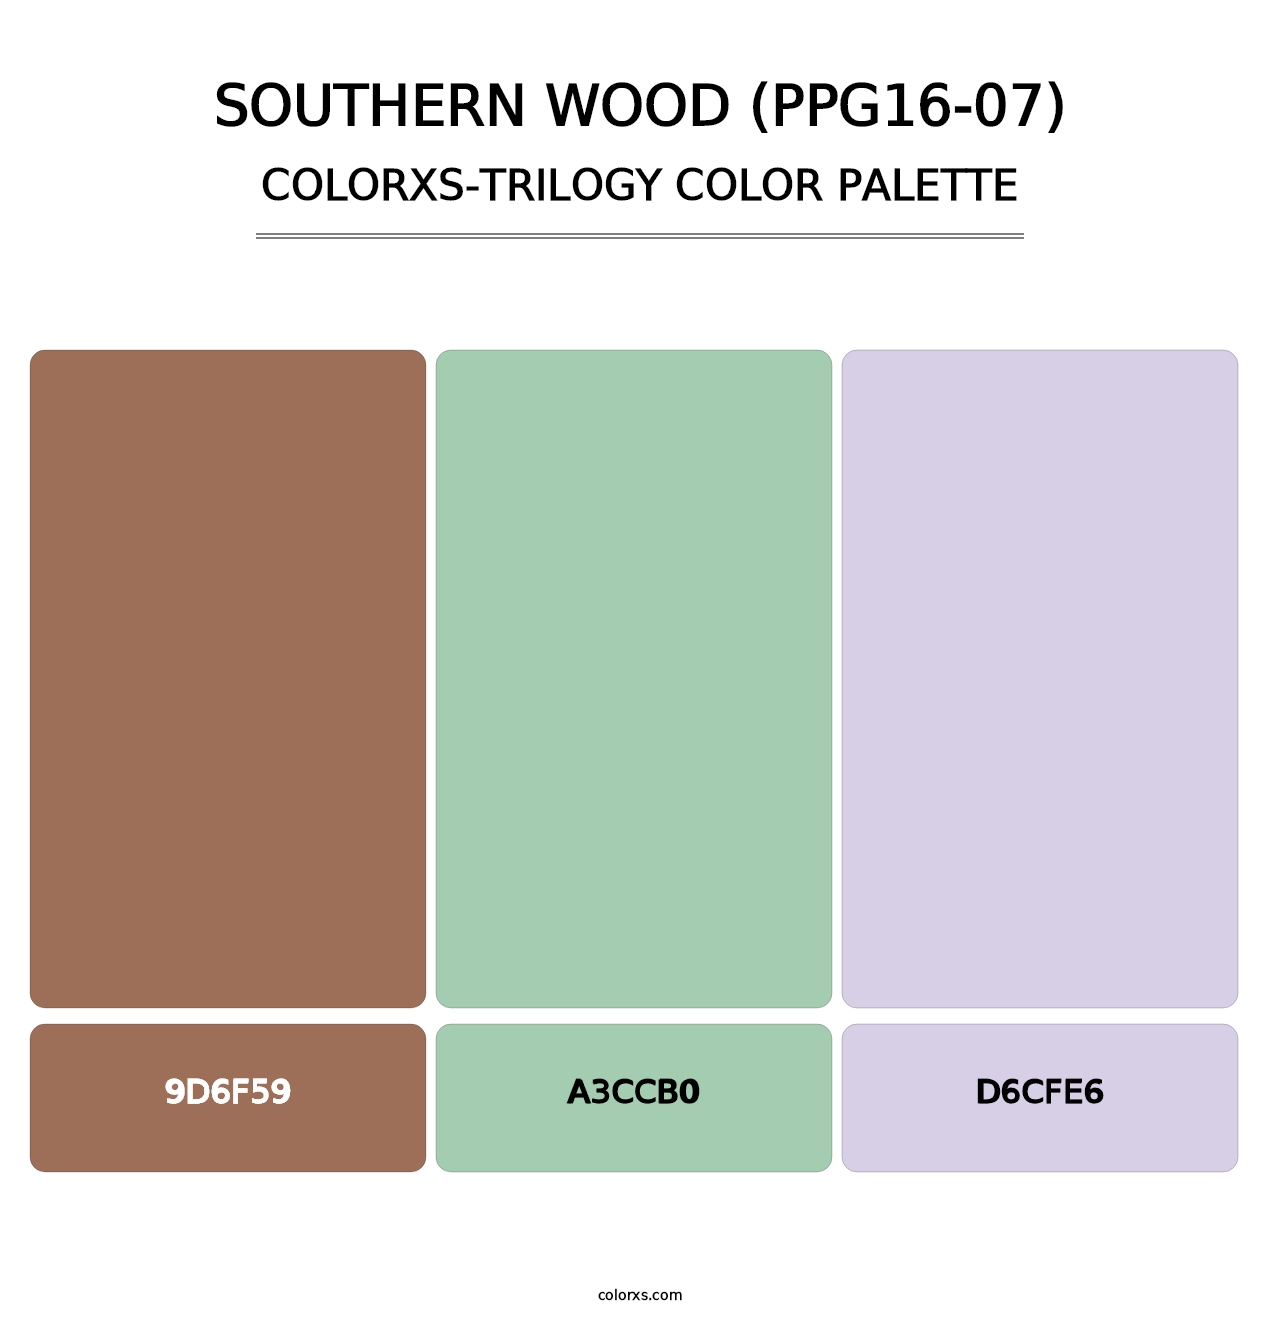 Southern Wood (PPG16-07) - Colorxs Trilogy Palette